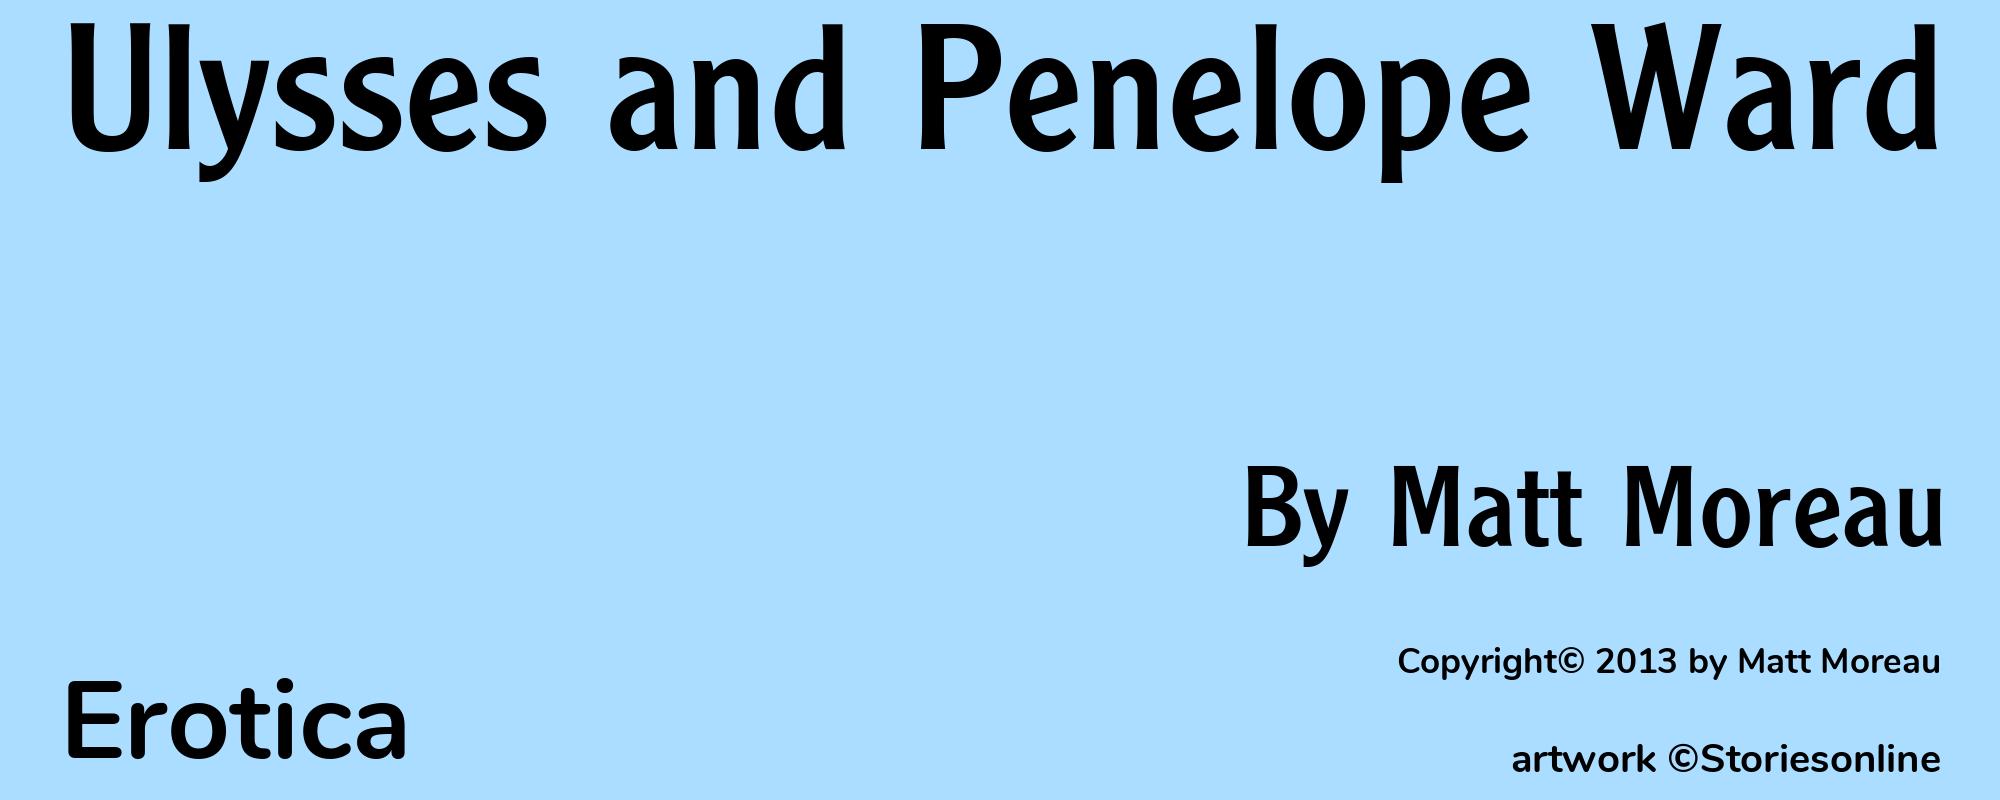 Ulysses and Penelope Ward - Cover